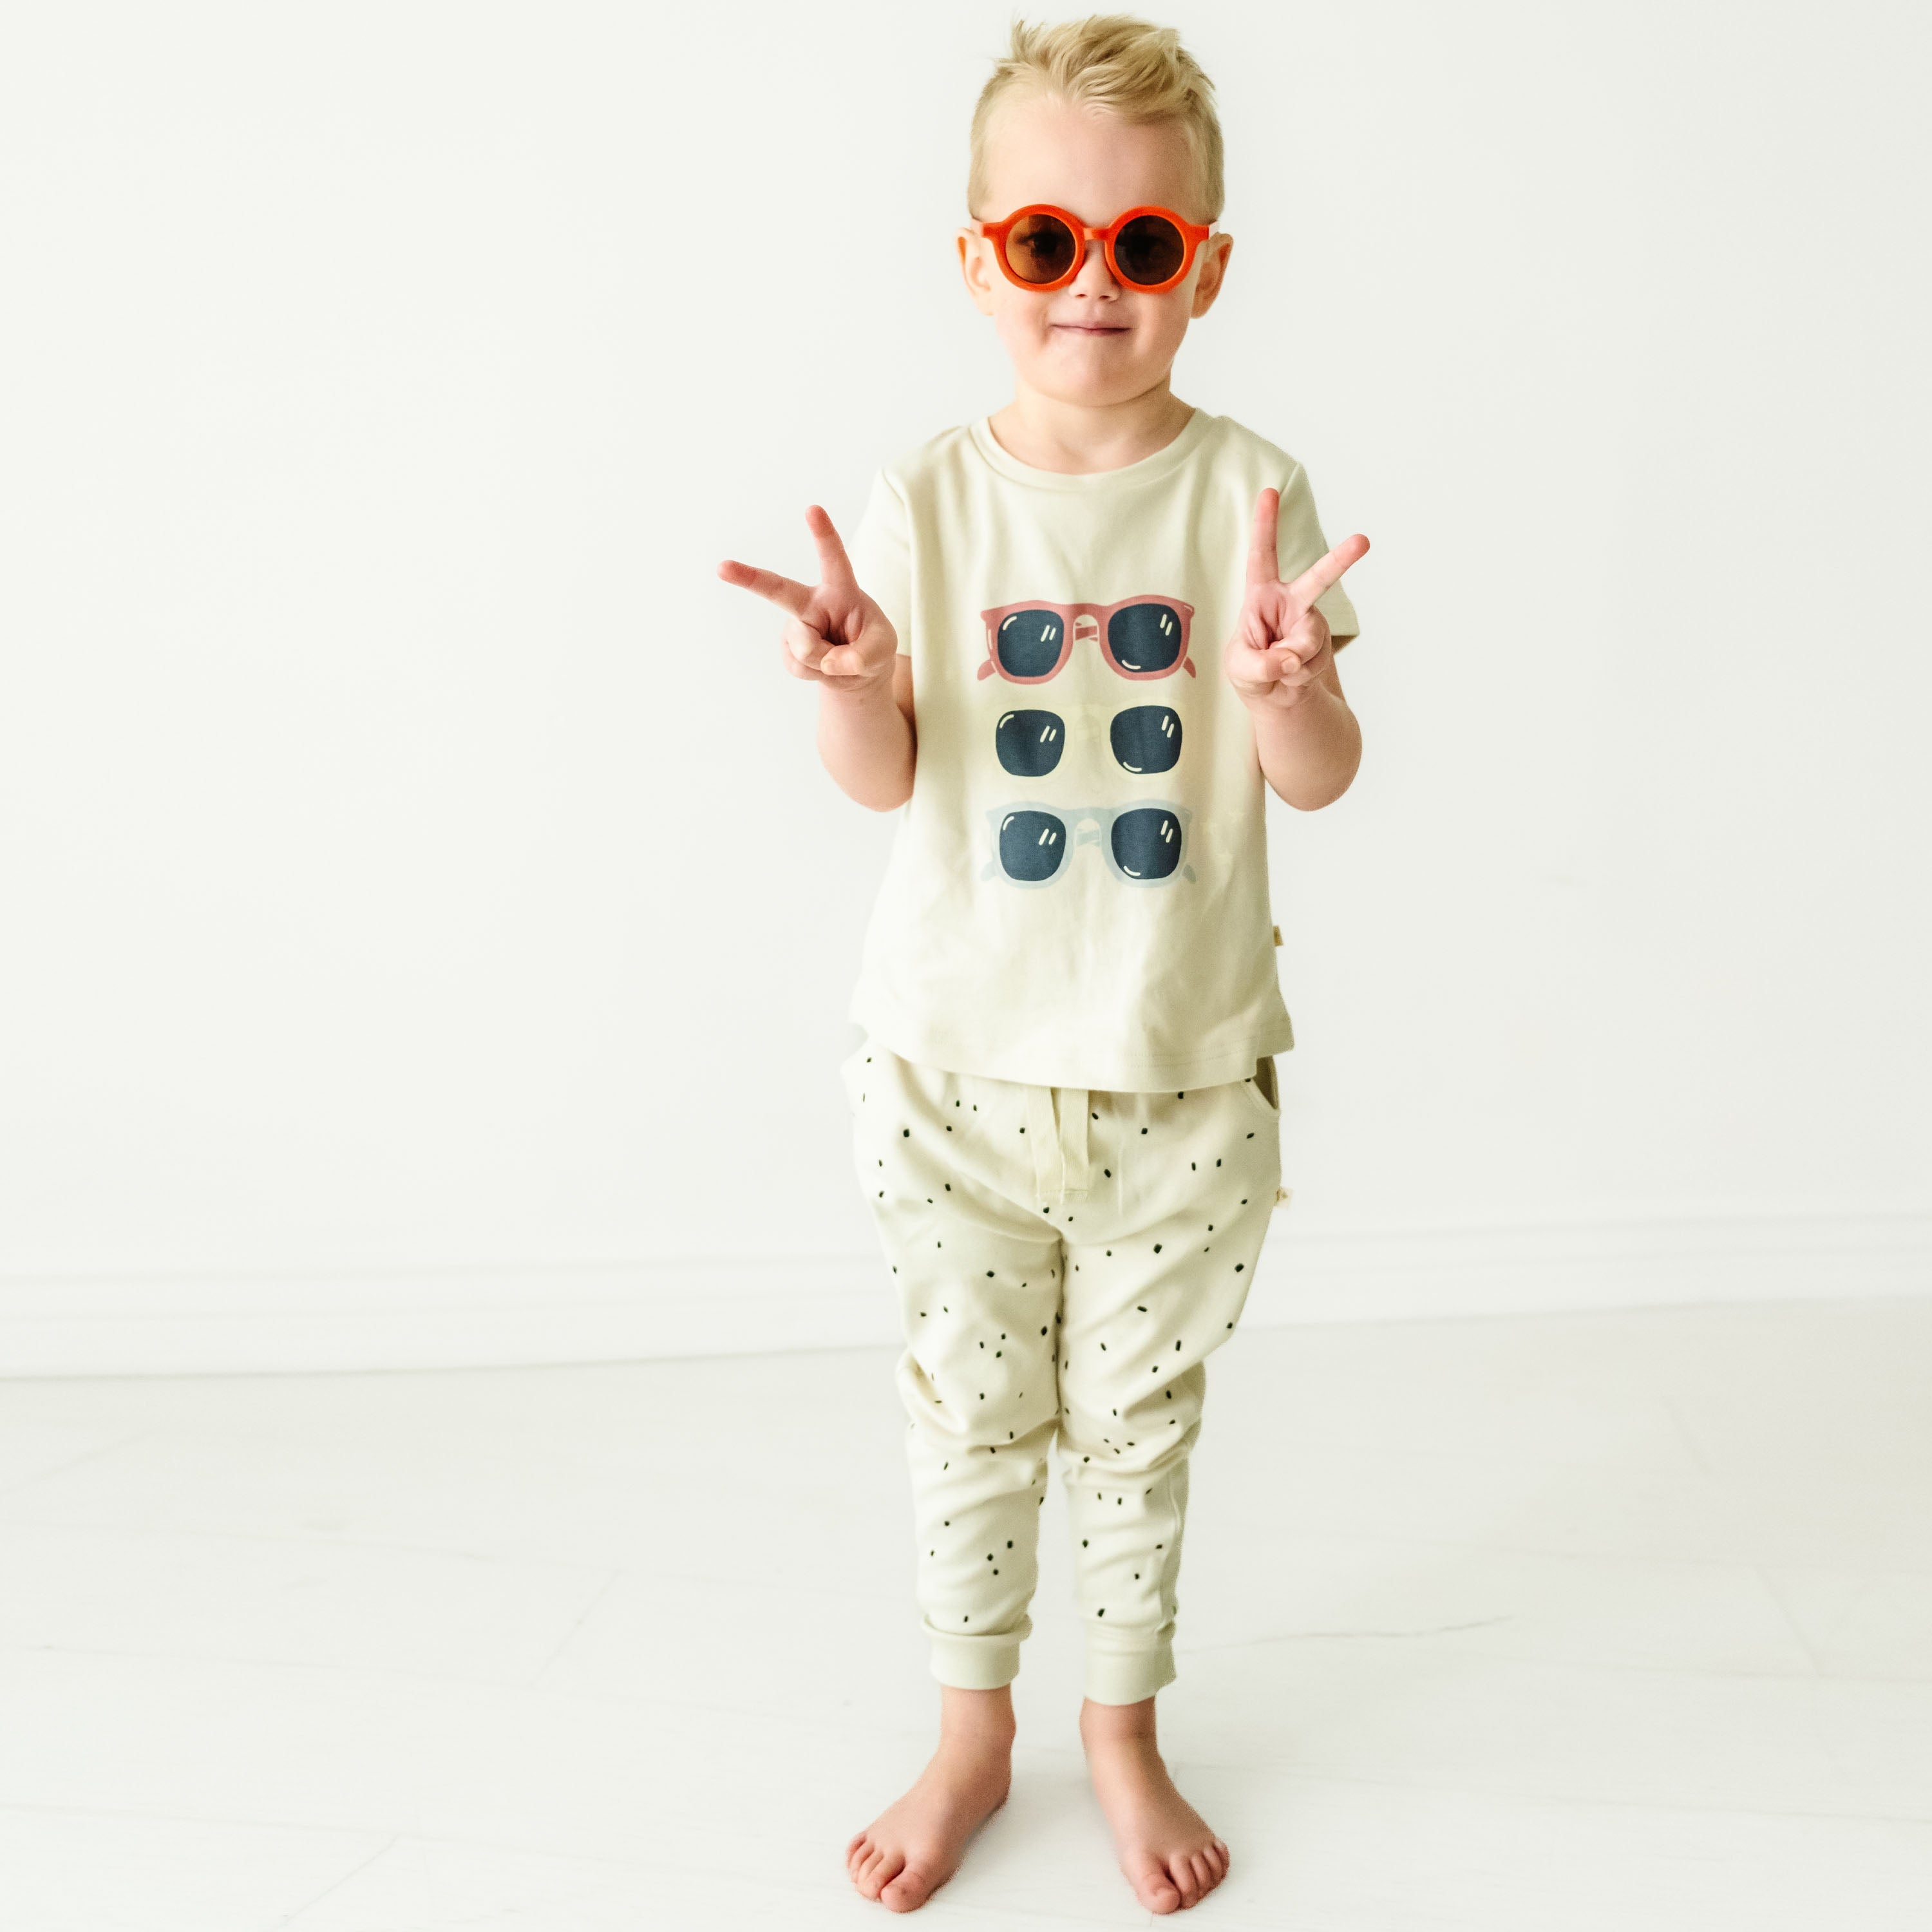 A baby wearing sunglasses and a Organic Crew Neck Tee - Shades gives a peace sign, standing barefoot on a light background.